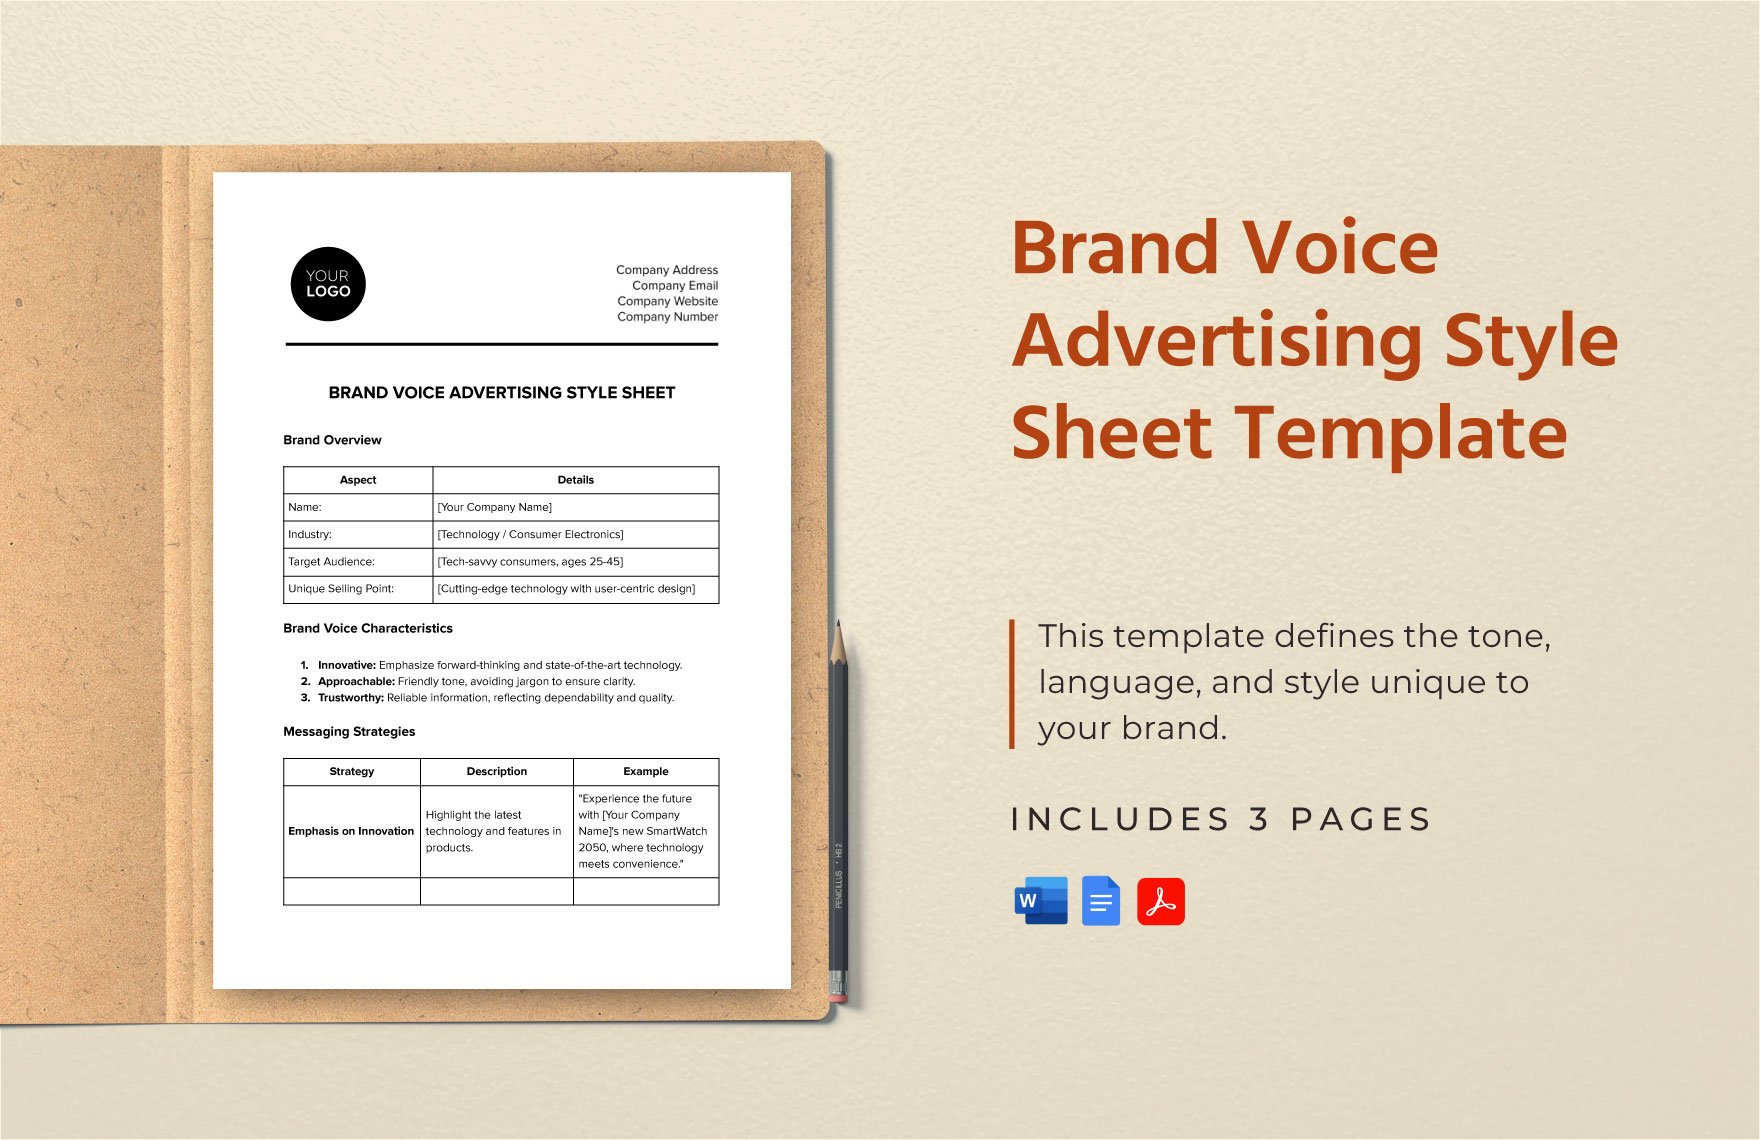 Brand Voice Advertising Style Sheet Template